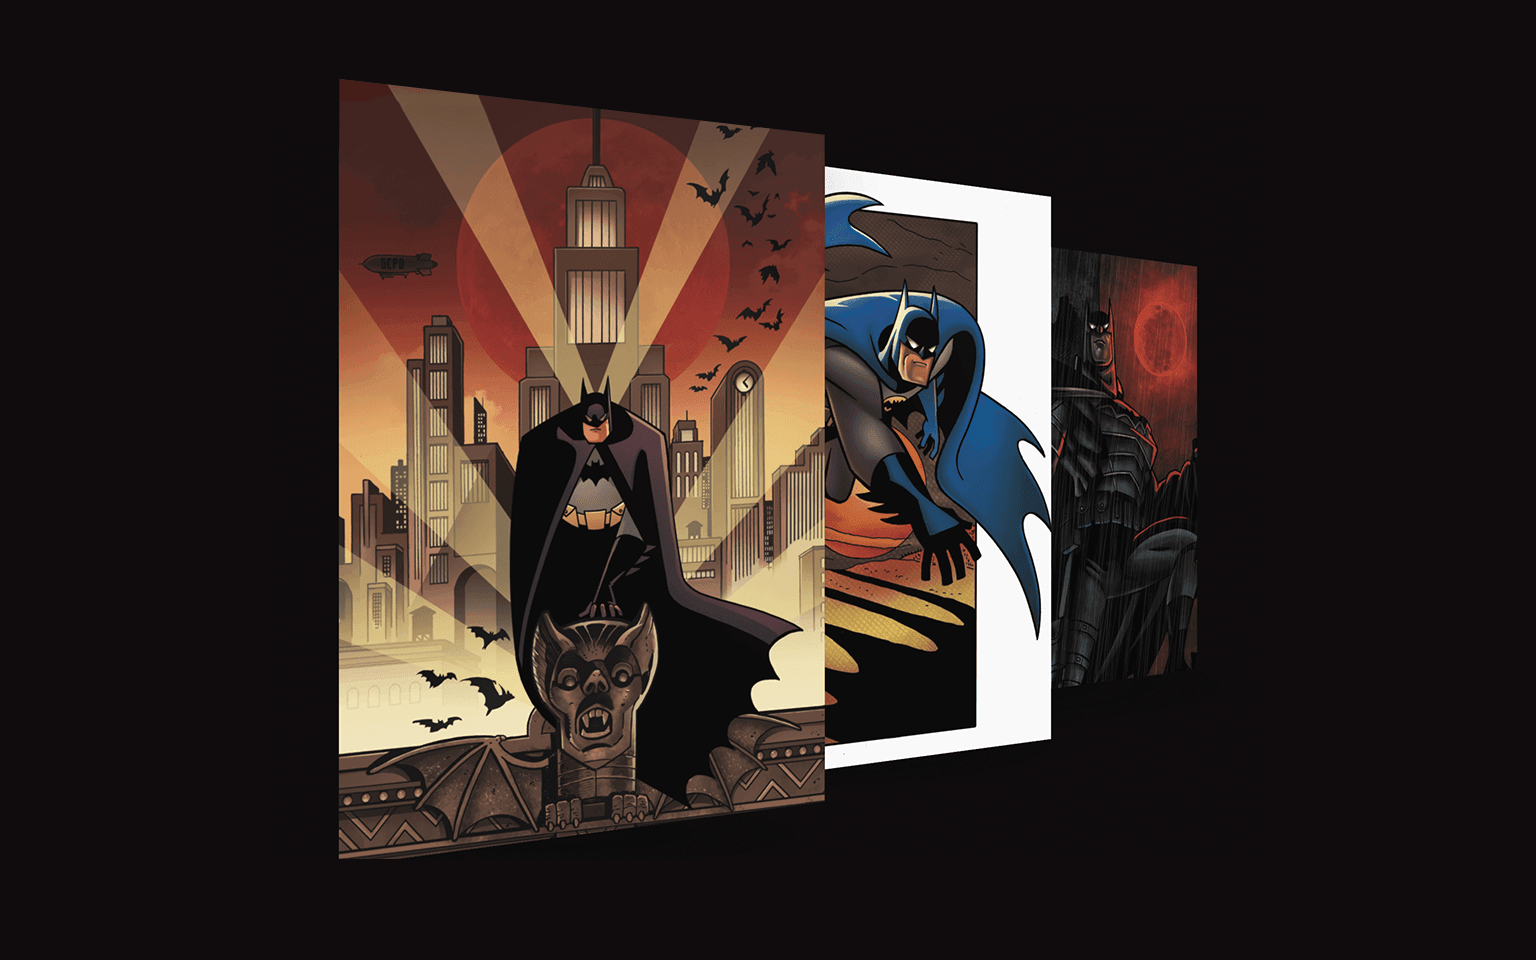 Batman: The Animated Series 30th Anniversary Limited Edition Art Prints